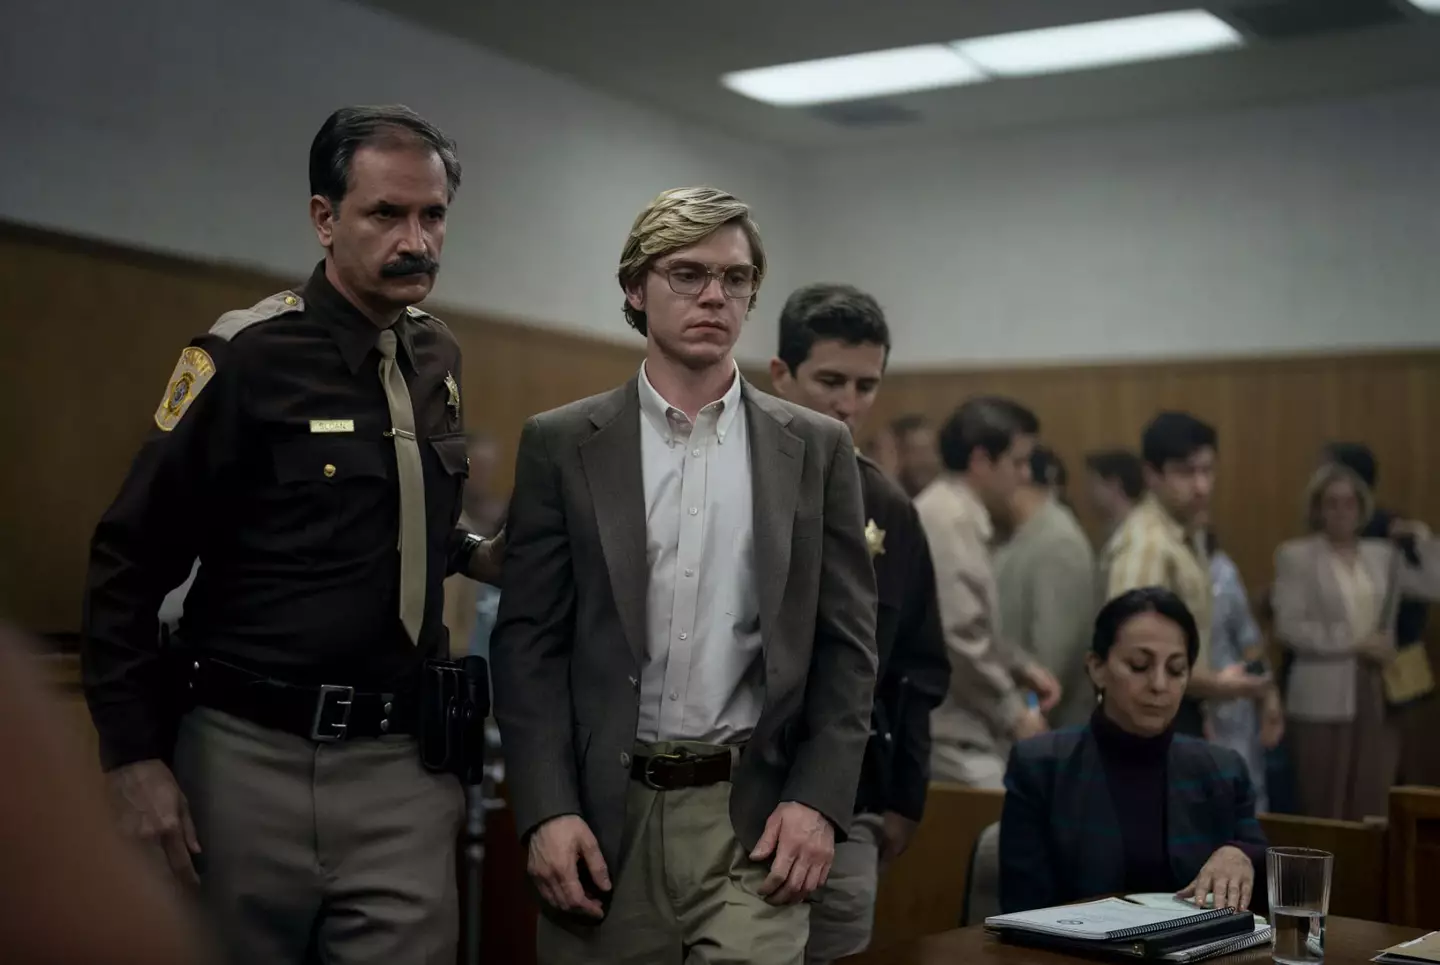 The series shows how police failings helped Dahmer get away with his crimes.